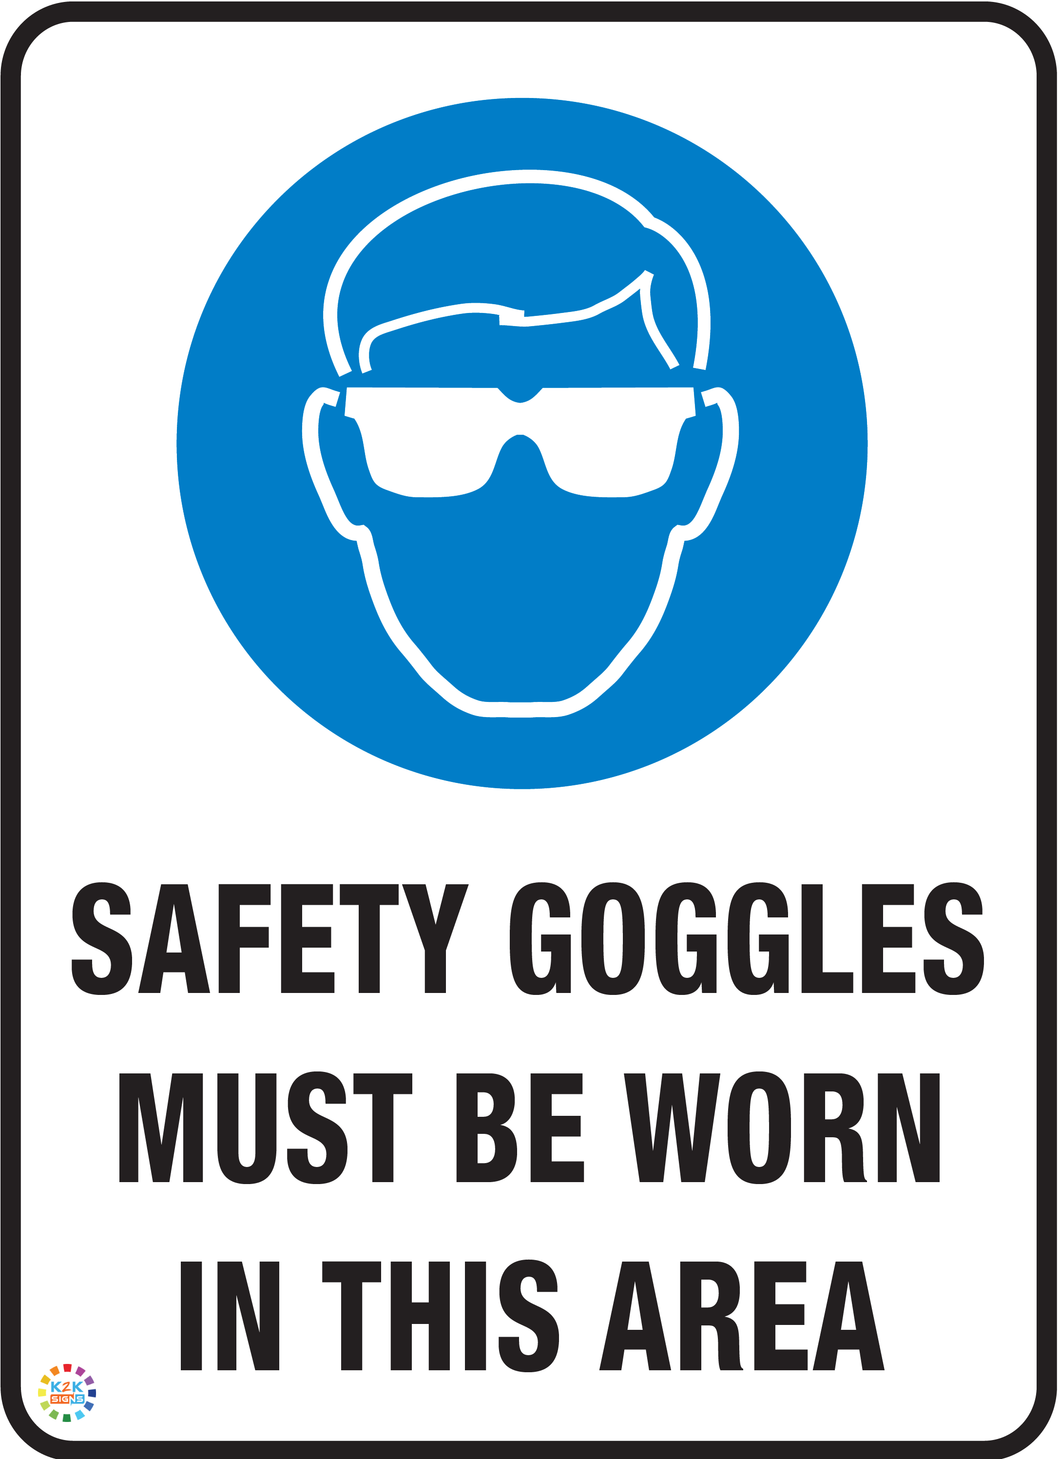 Safety Goggles Must Be Worn In This Area Sign